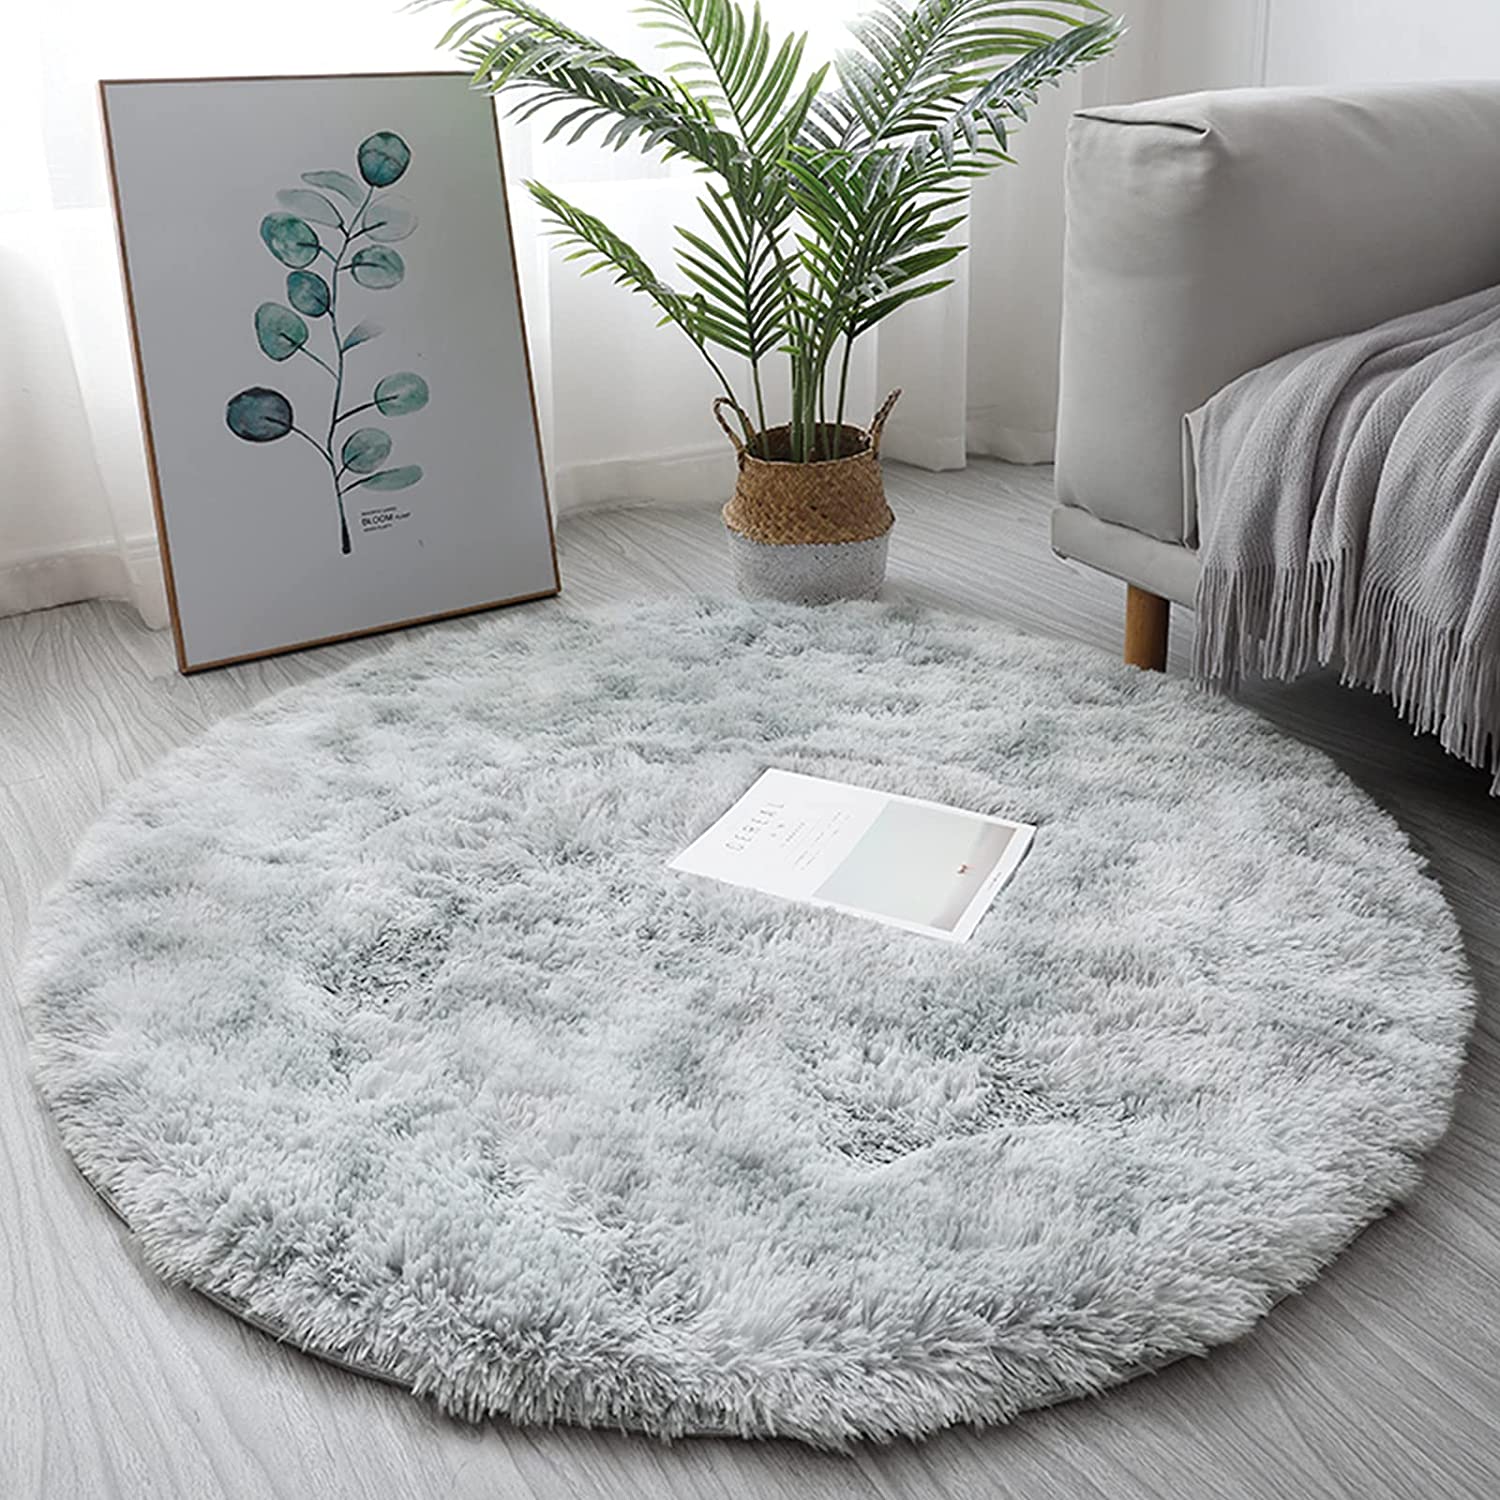 Silver Bubble Thick Round Rug Carpets